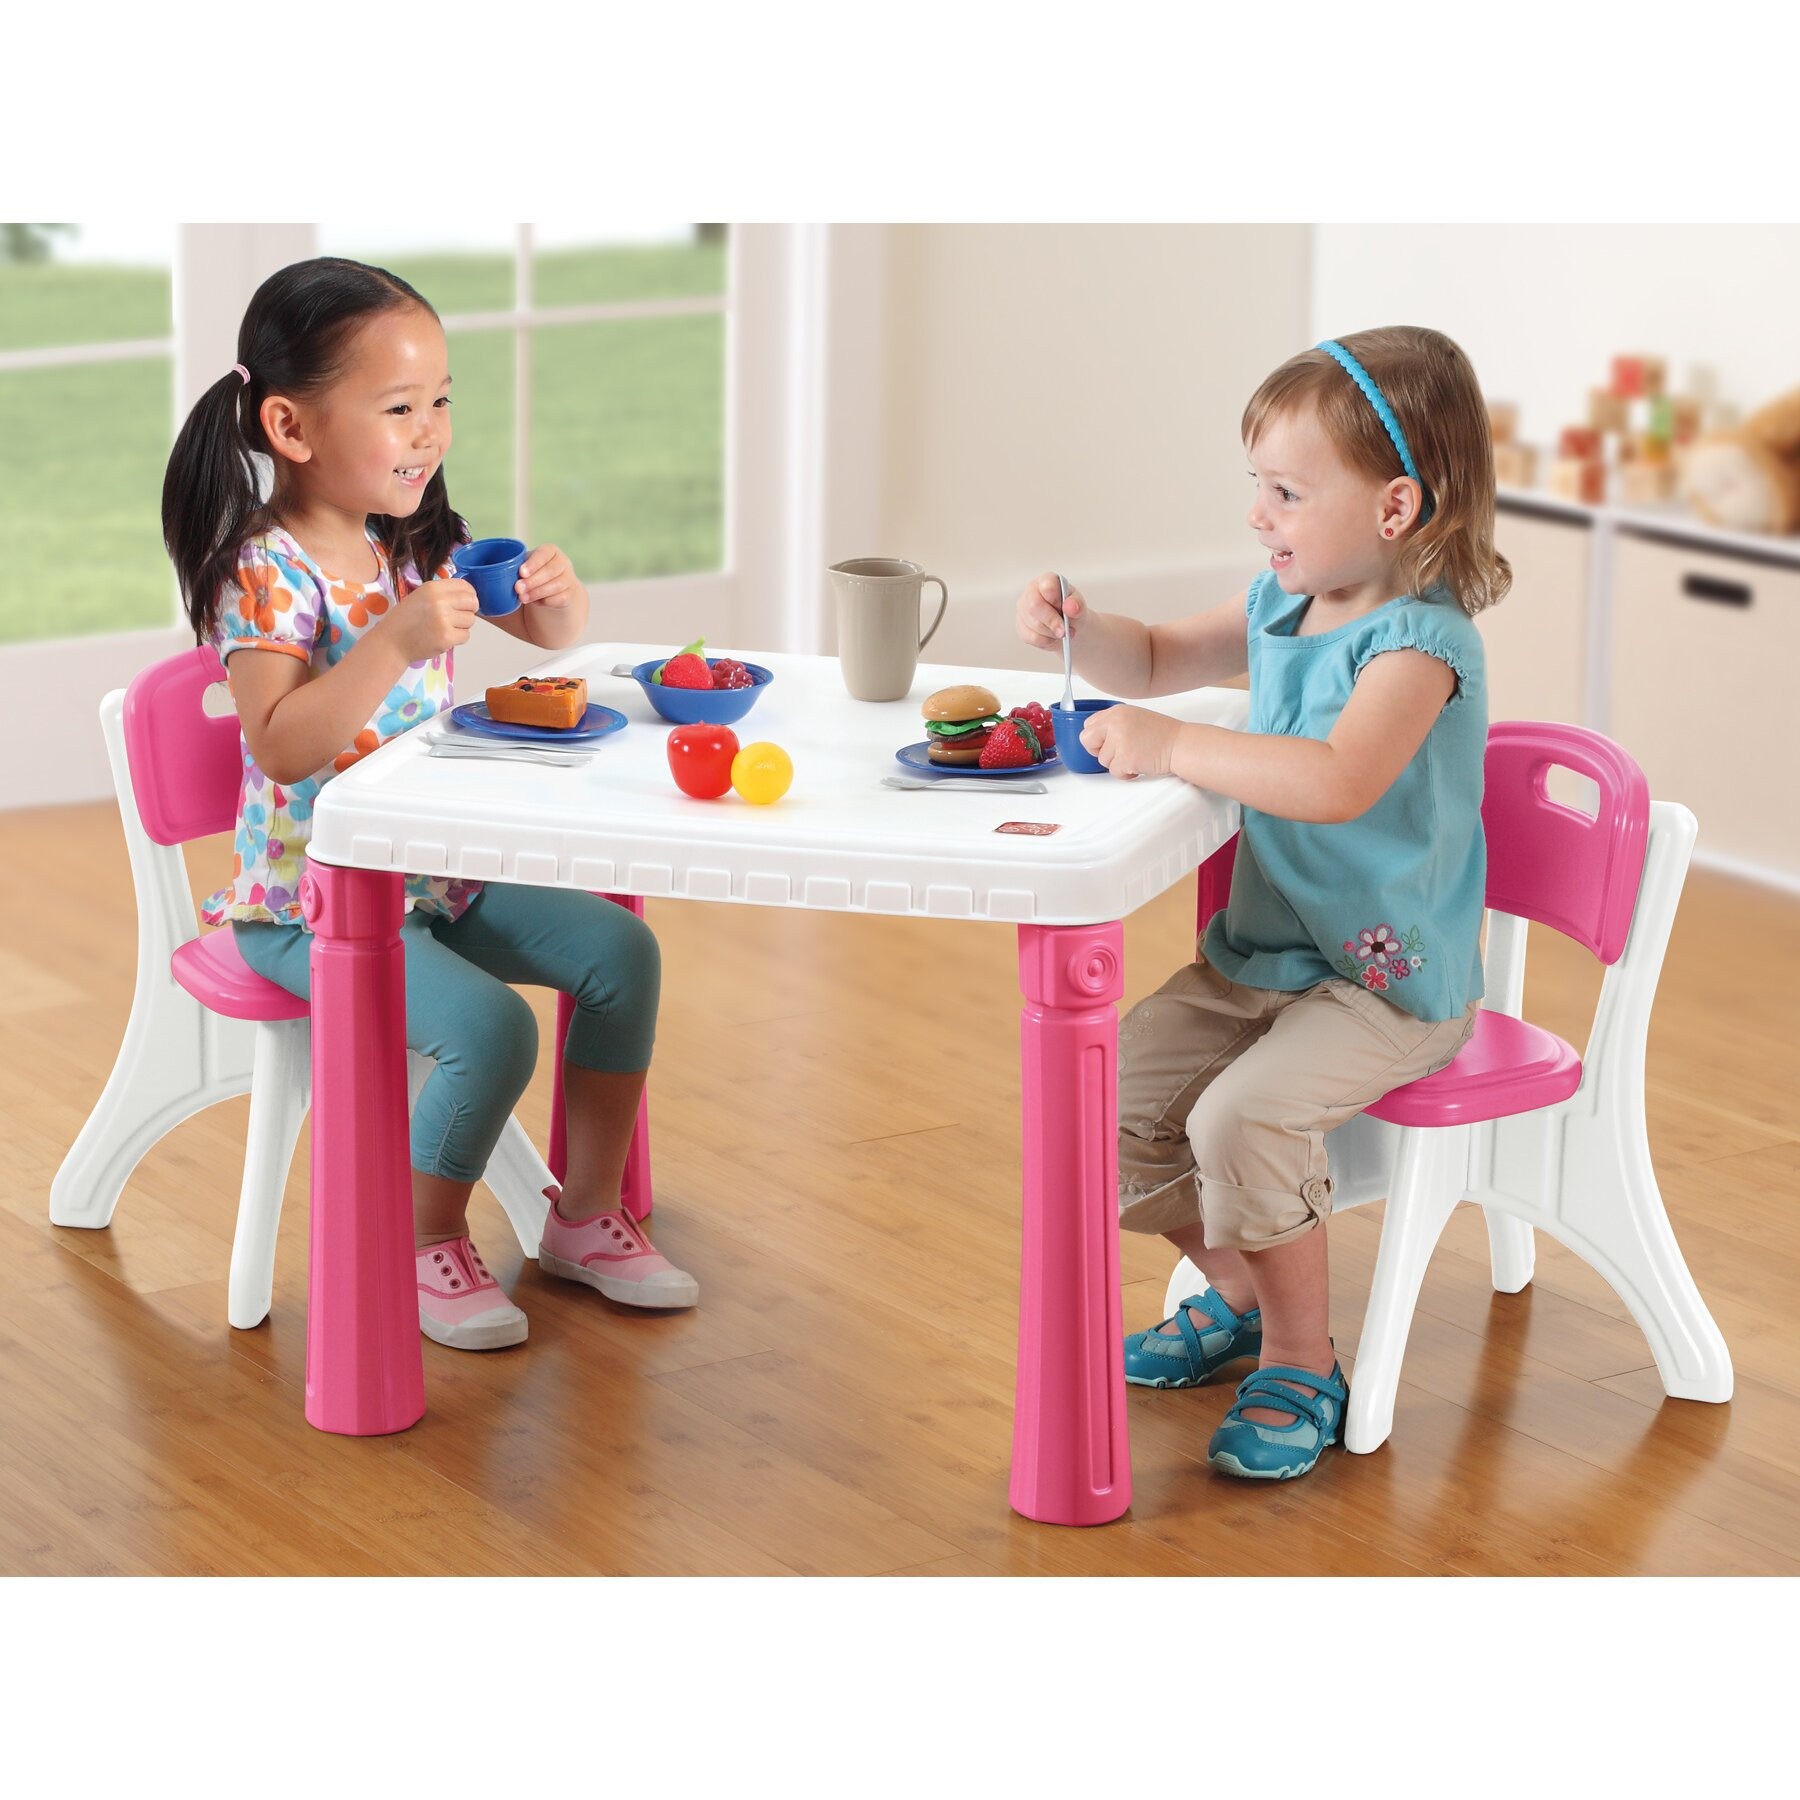 Kids Kitchen Table
 Step2 Lifestyle Kitchen Kids Table and Chair Set & Reviews